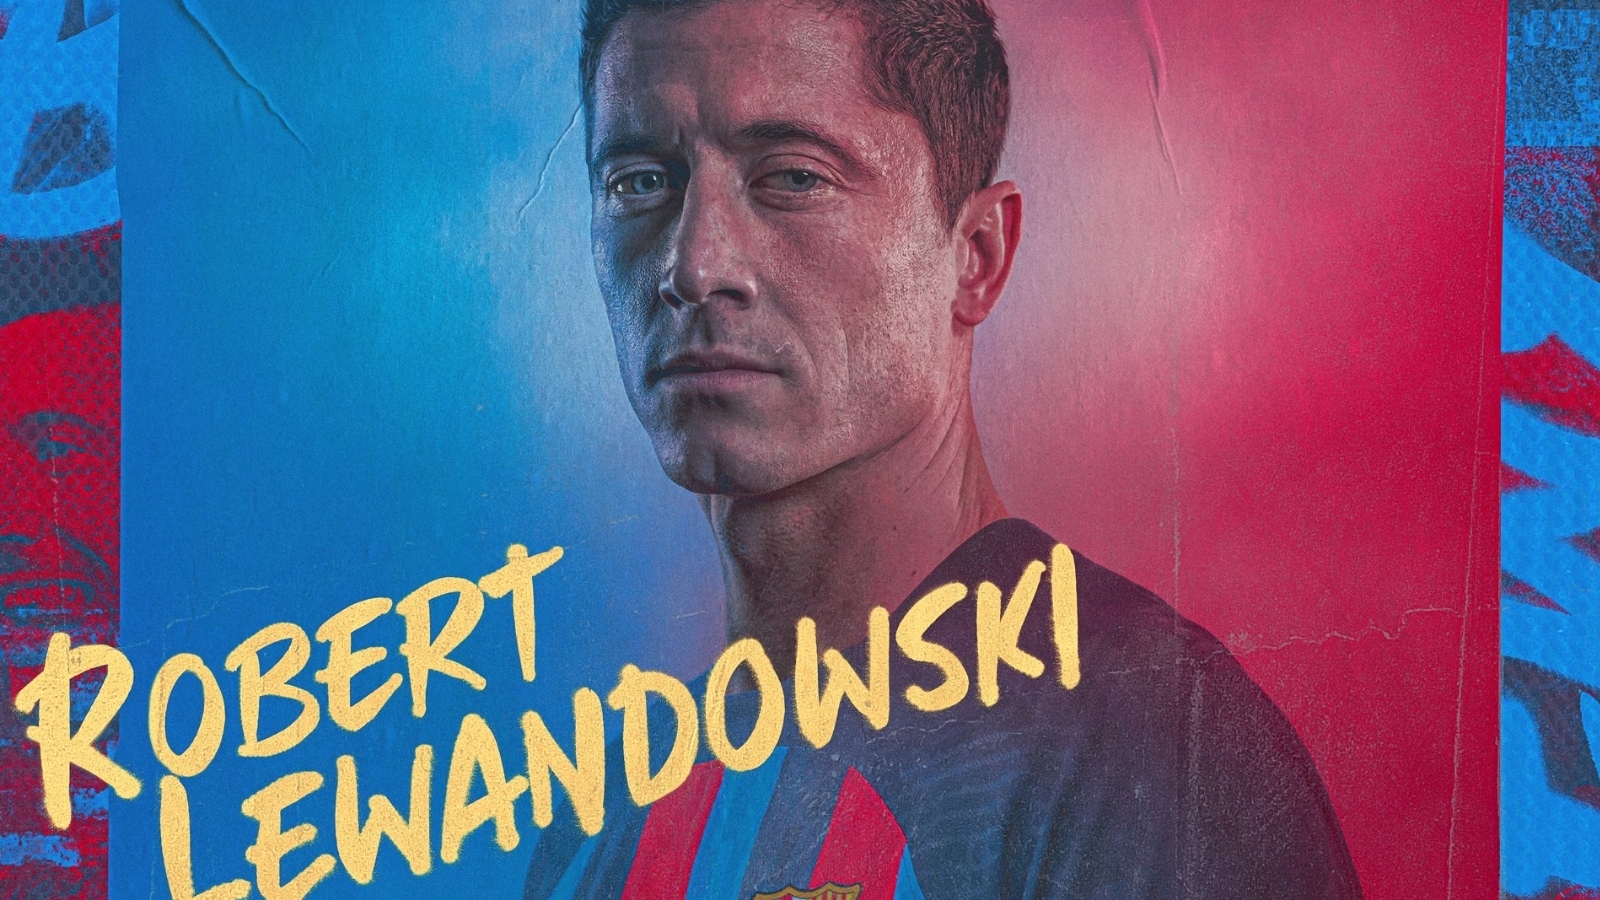 Barcelona sell out of Lewandowski shirts club shop runs out of the letter W to put on jerseys. Goal.com US